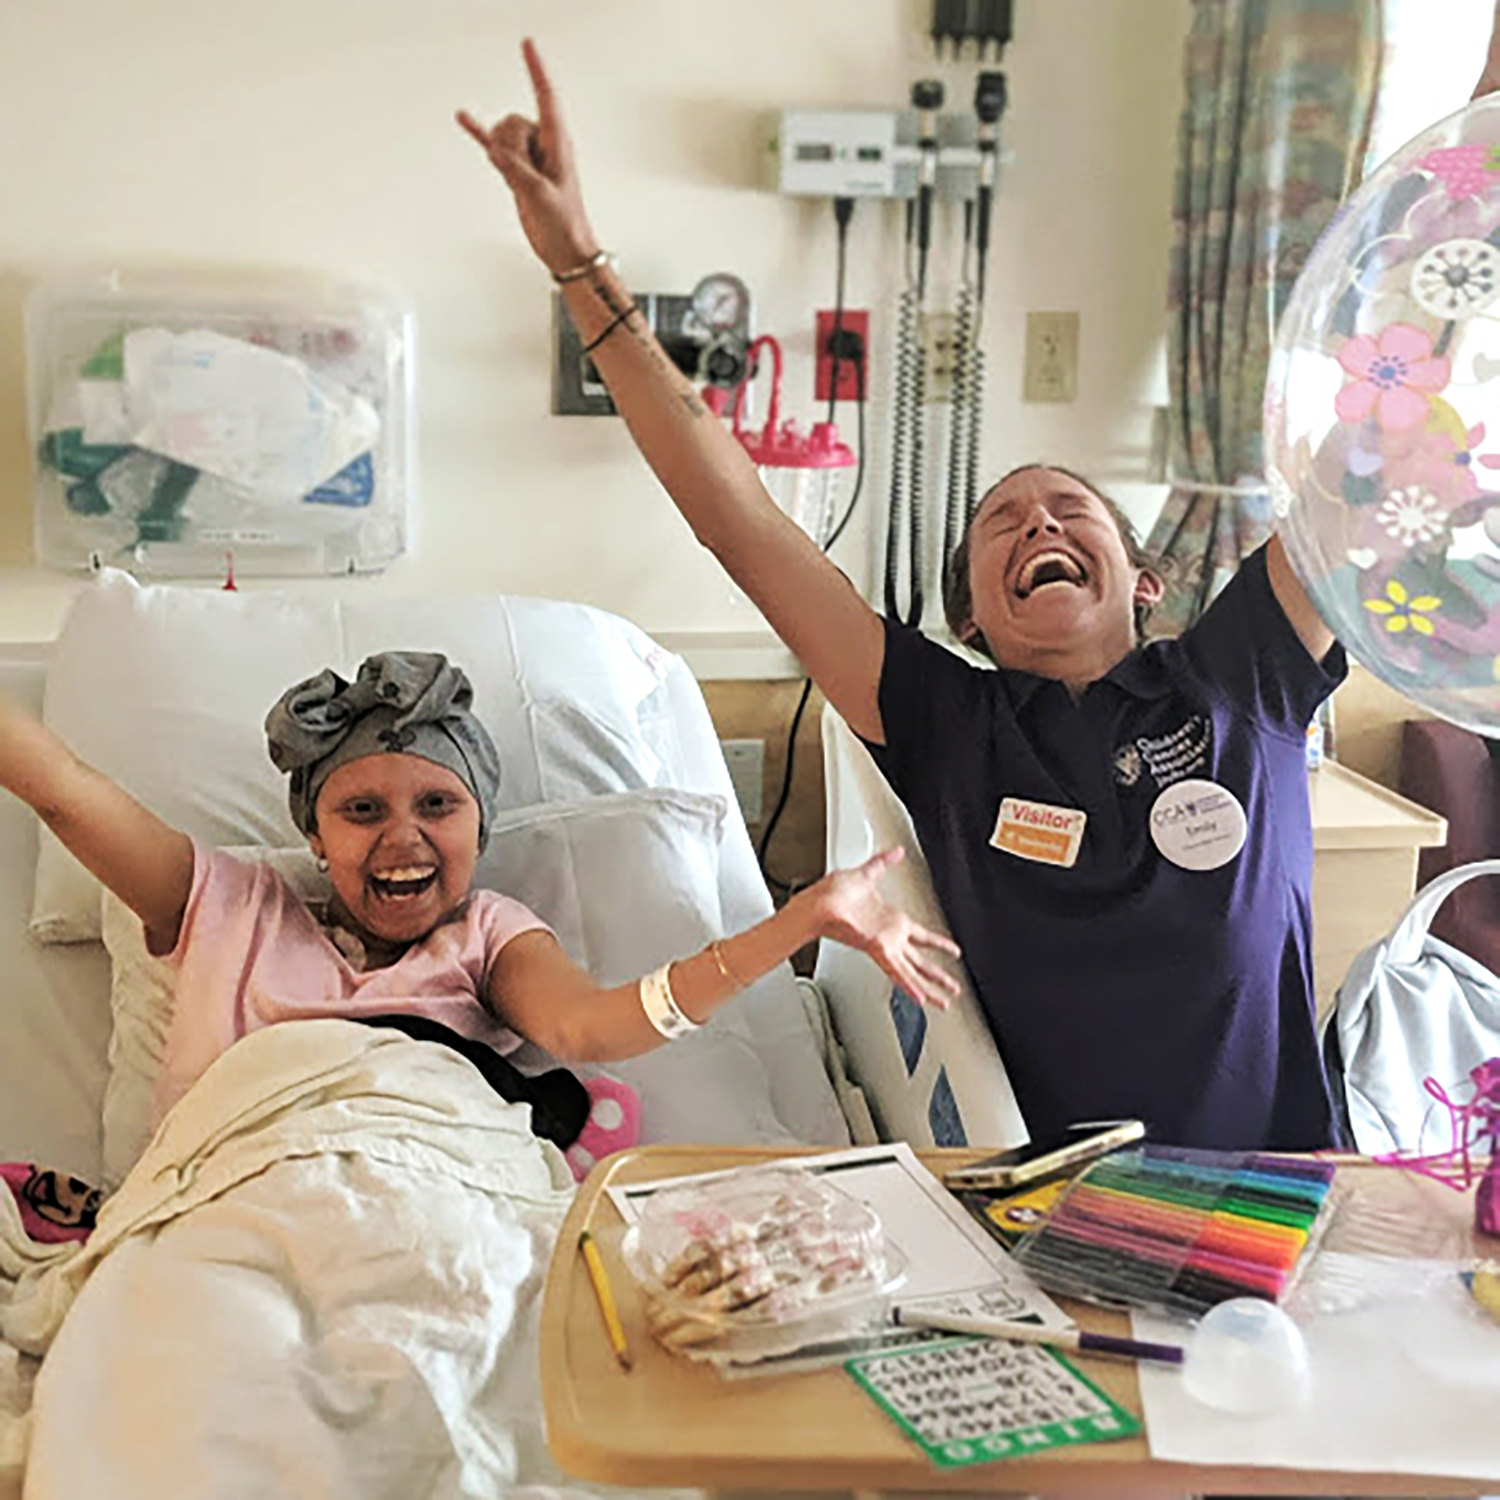 A hospital patient and a hospital worker celebrate with arms raised